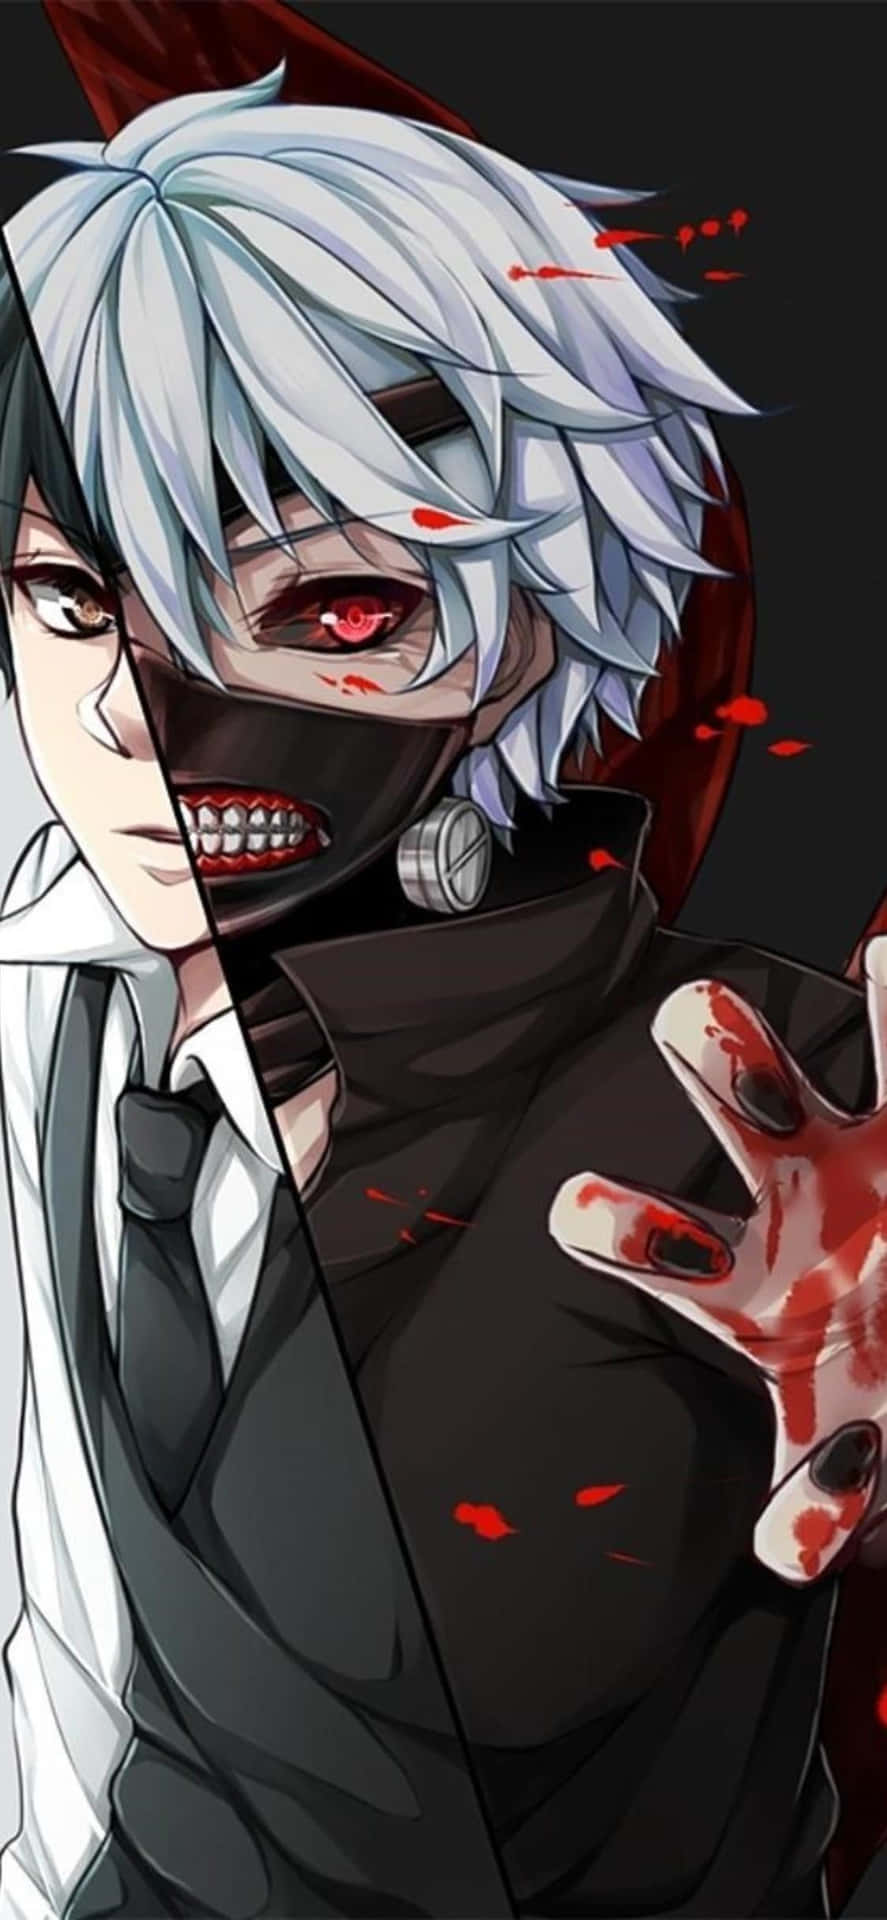 Don't be scared, it's just a horror anime boy! Wallpaper